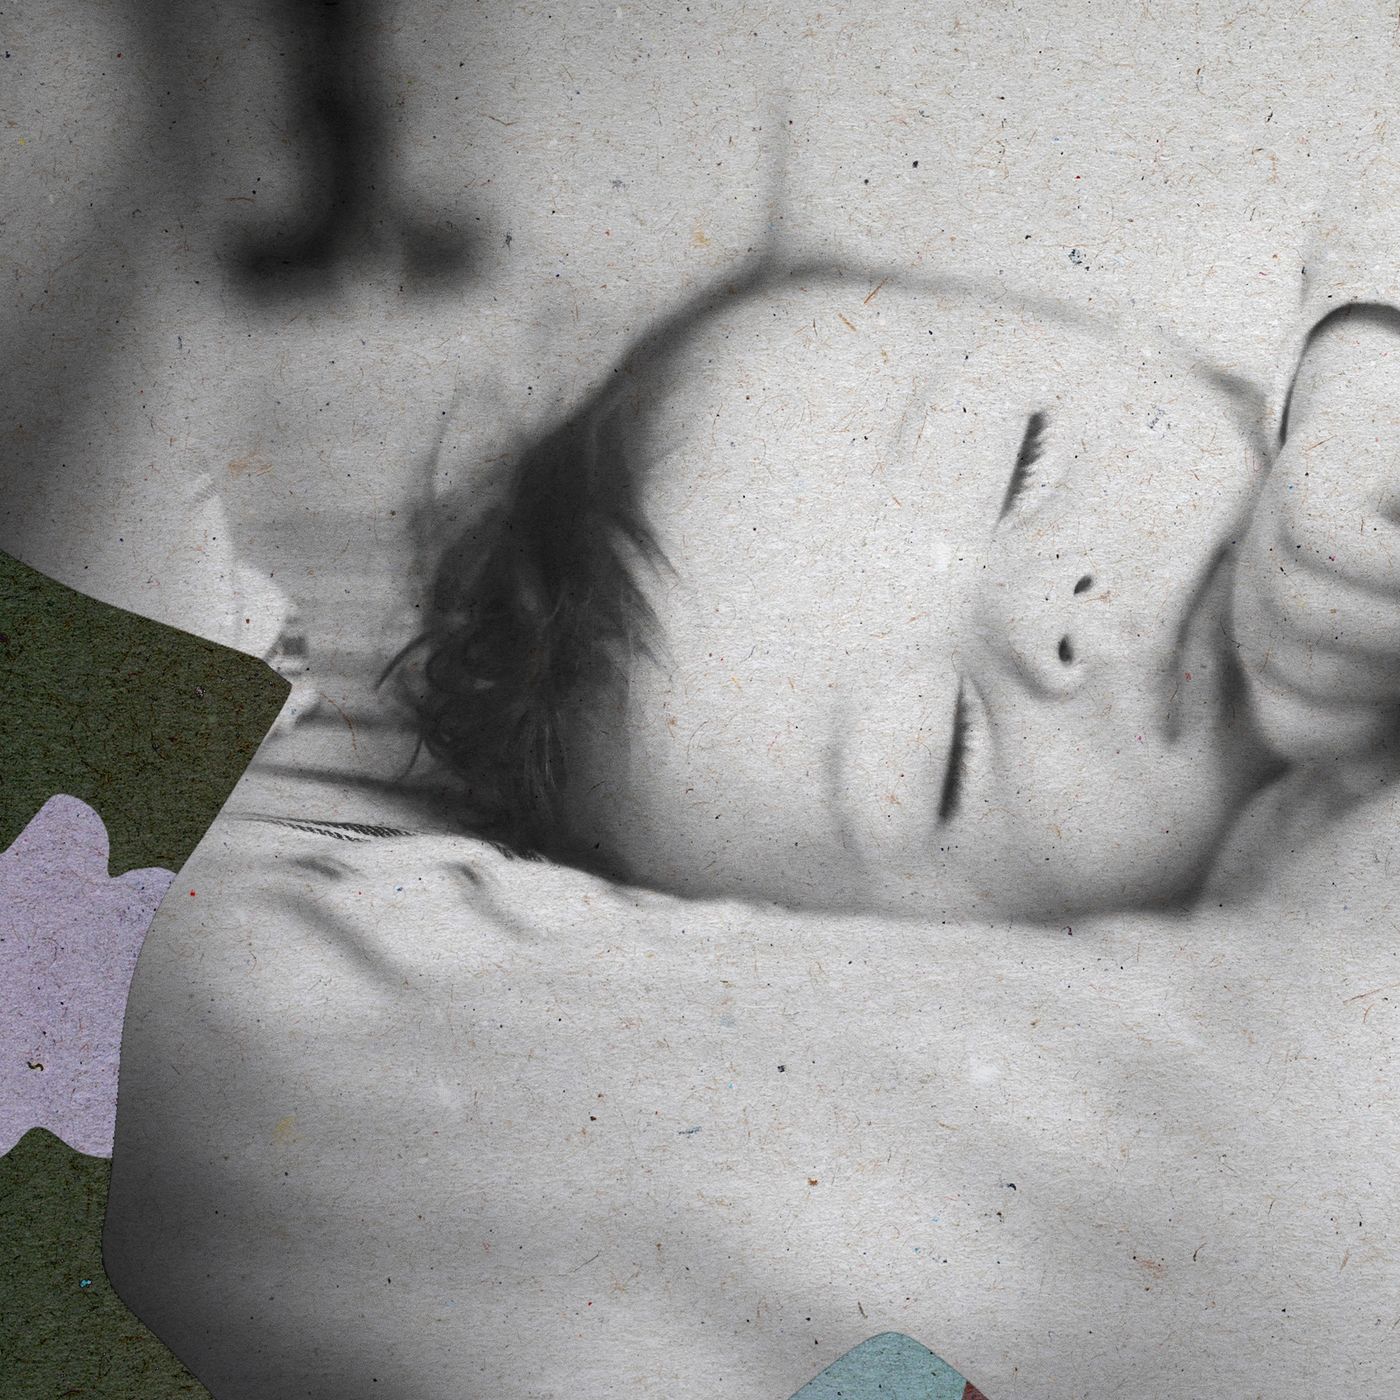 Stripping While Sleeping - Co-sleeping Pro, Cons, and Controversy